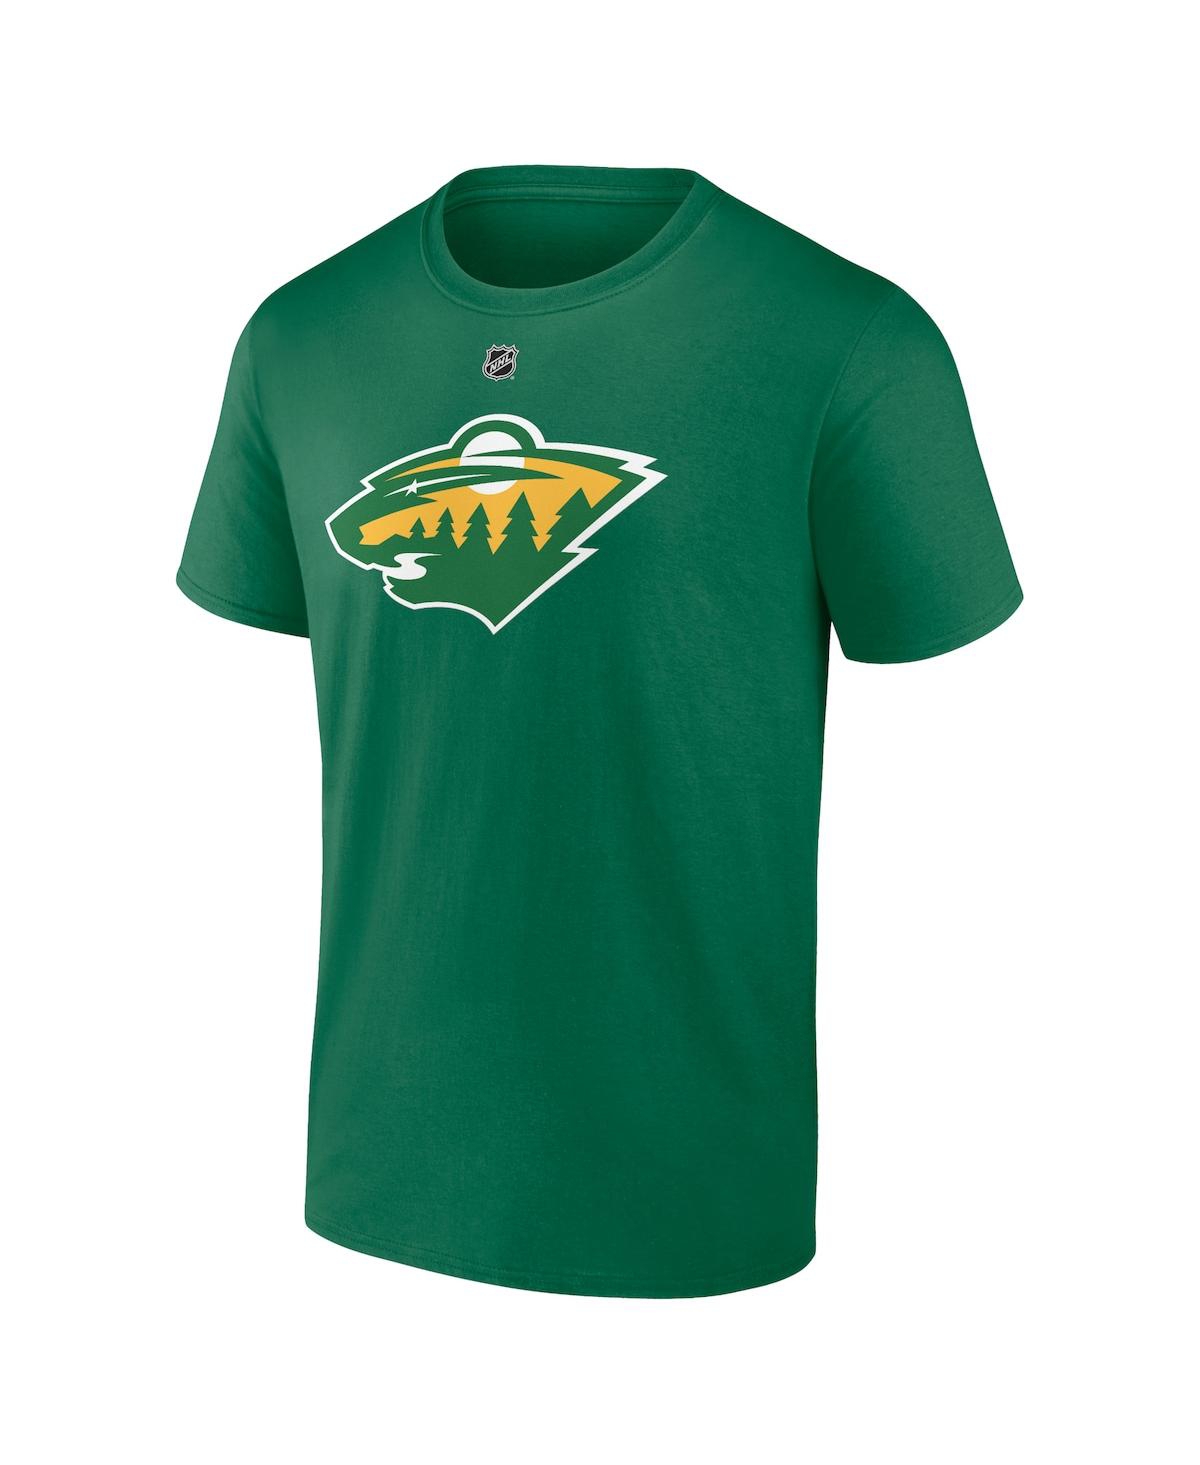 Shop Fanatics Men's  Green Matthew Boldy Minnesota Wild Authentic Stack Name And Number T-shirt